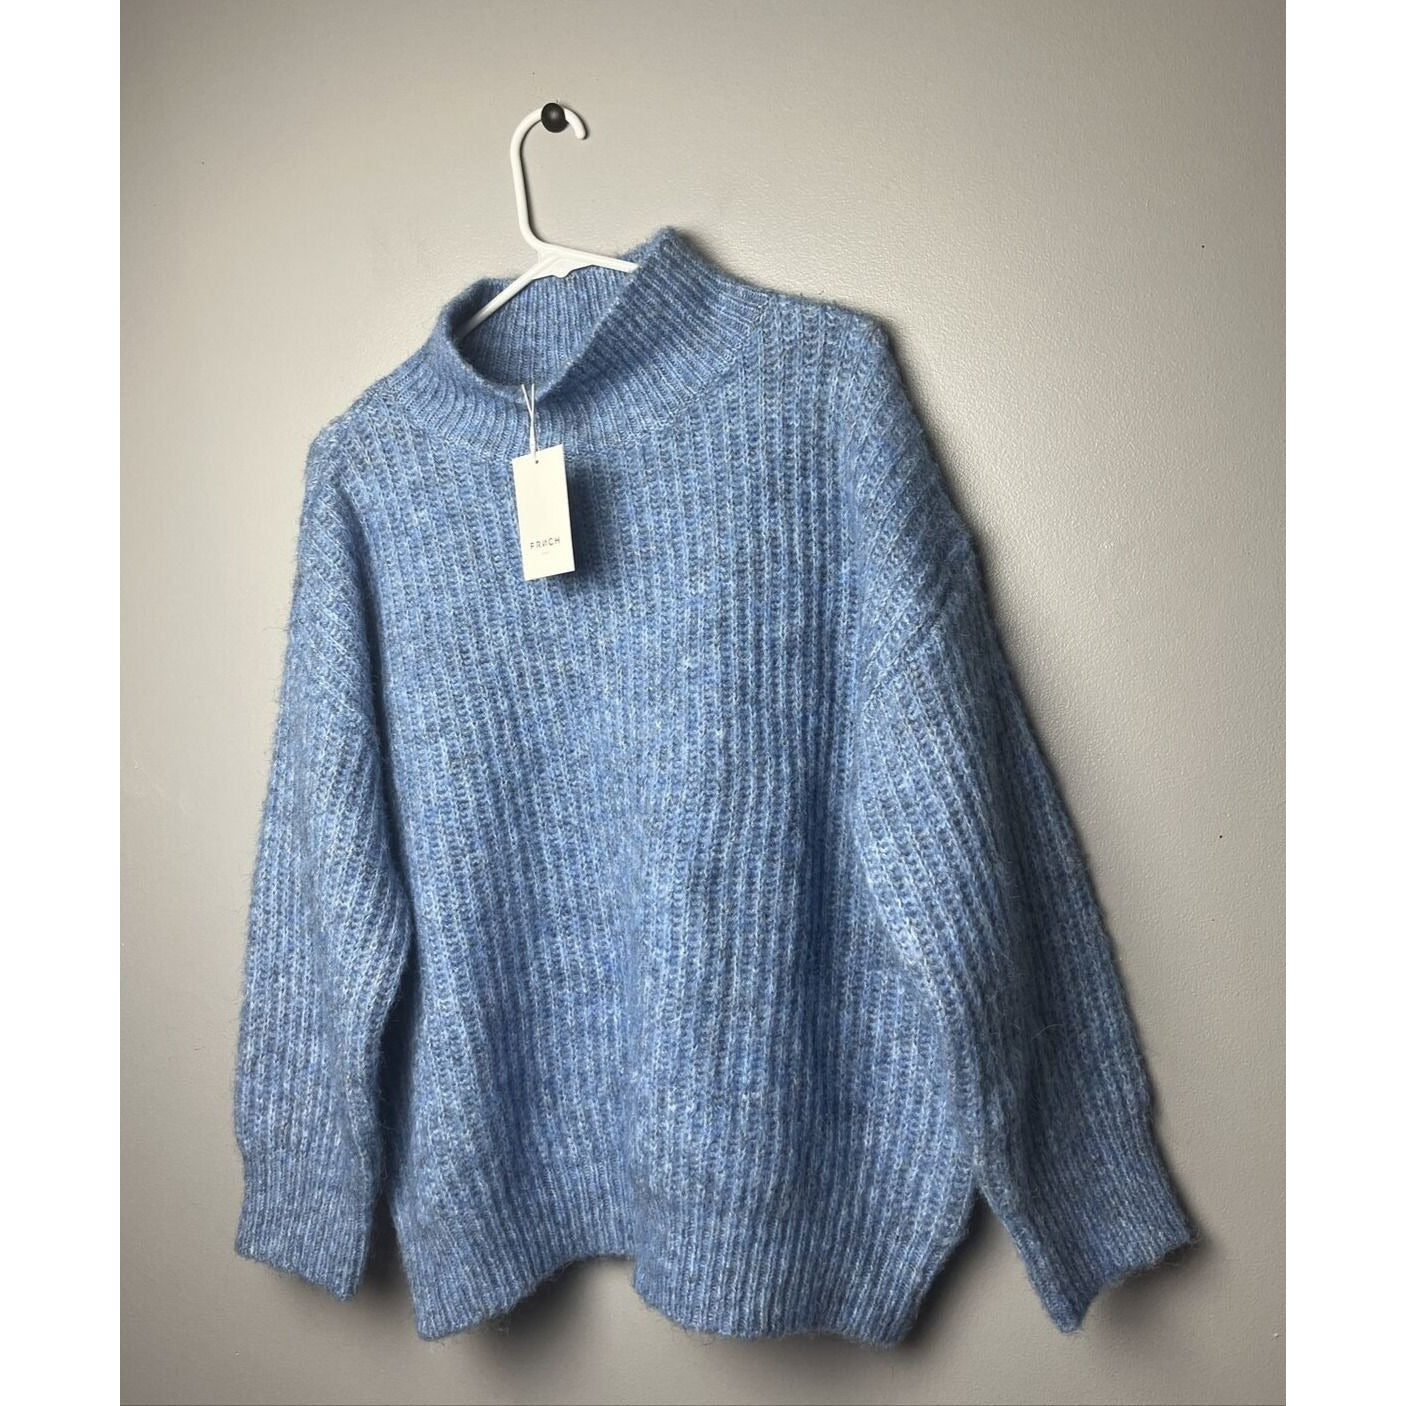 FRNCH Paris NWT Women’s Cable Knit Mock Neck Sweater Heather Blue Size S/M